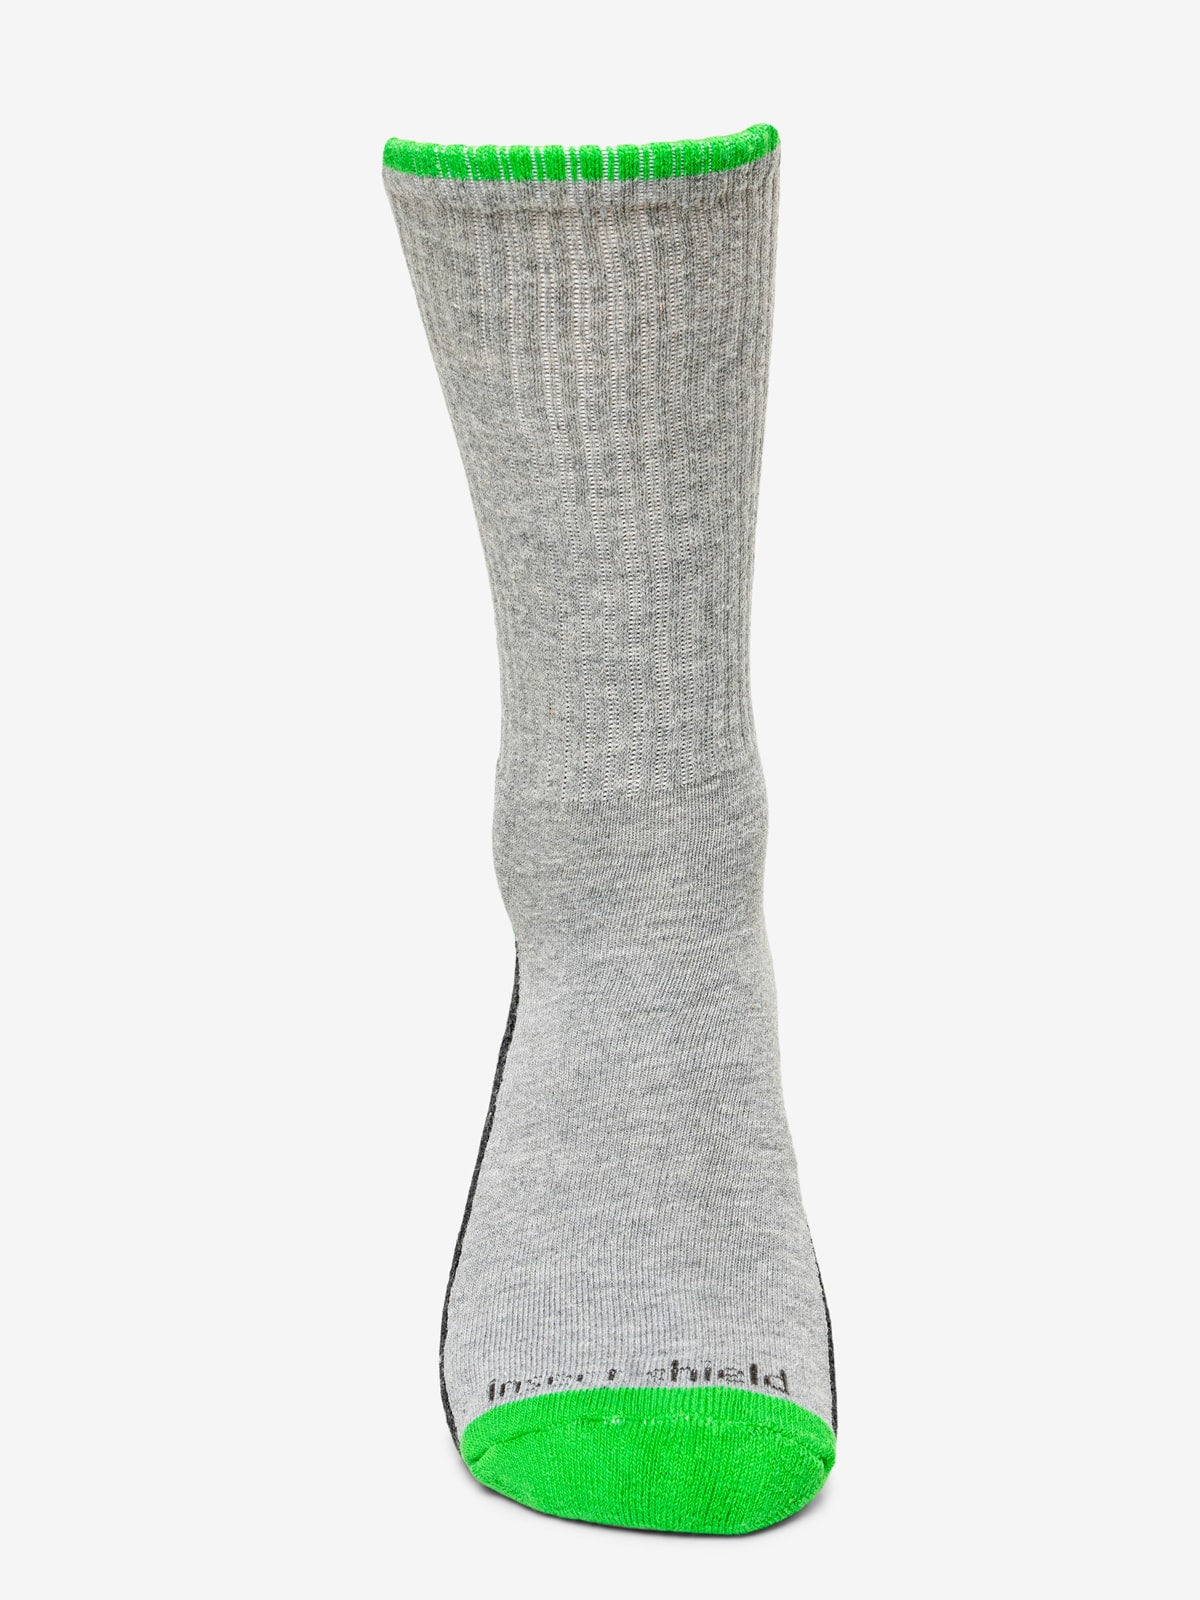 Insect Repellent Sport Crew Socks – Insect Shield